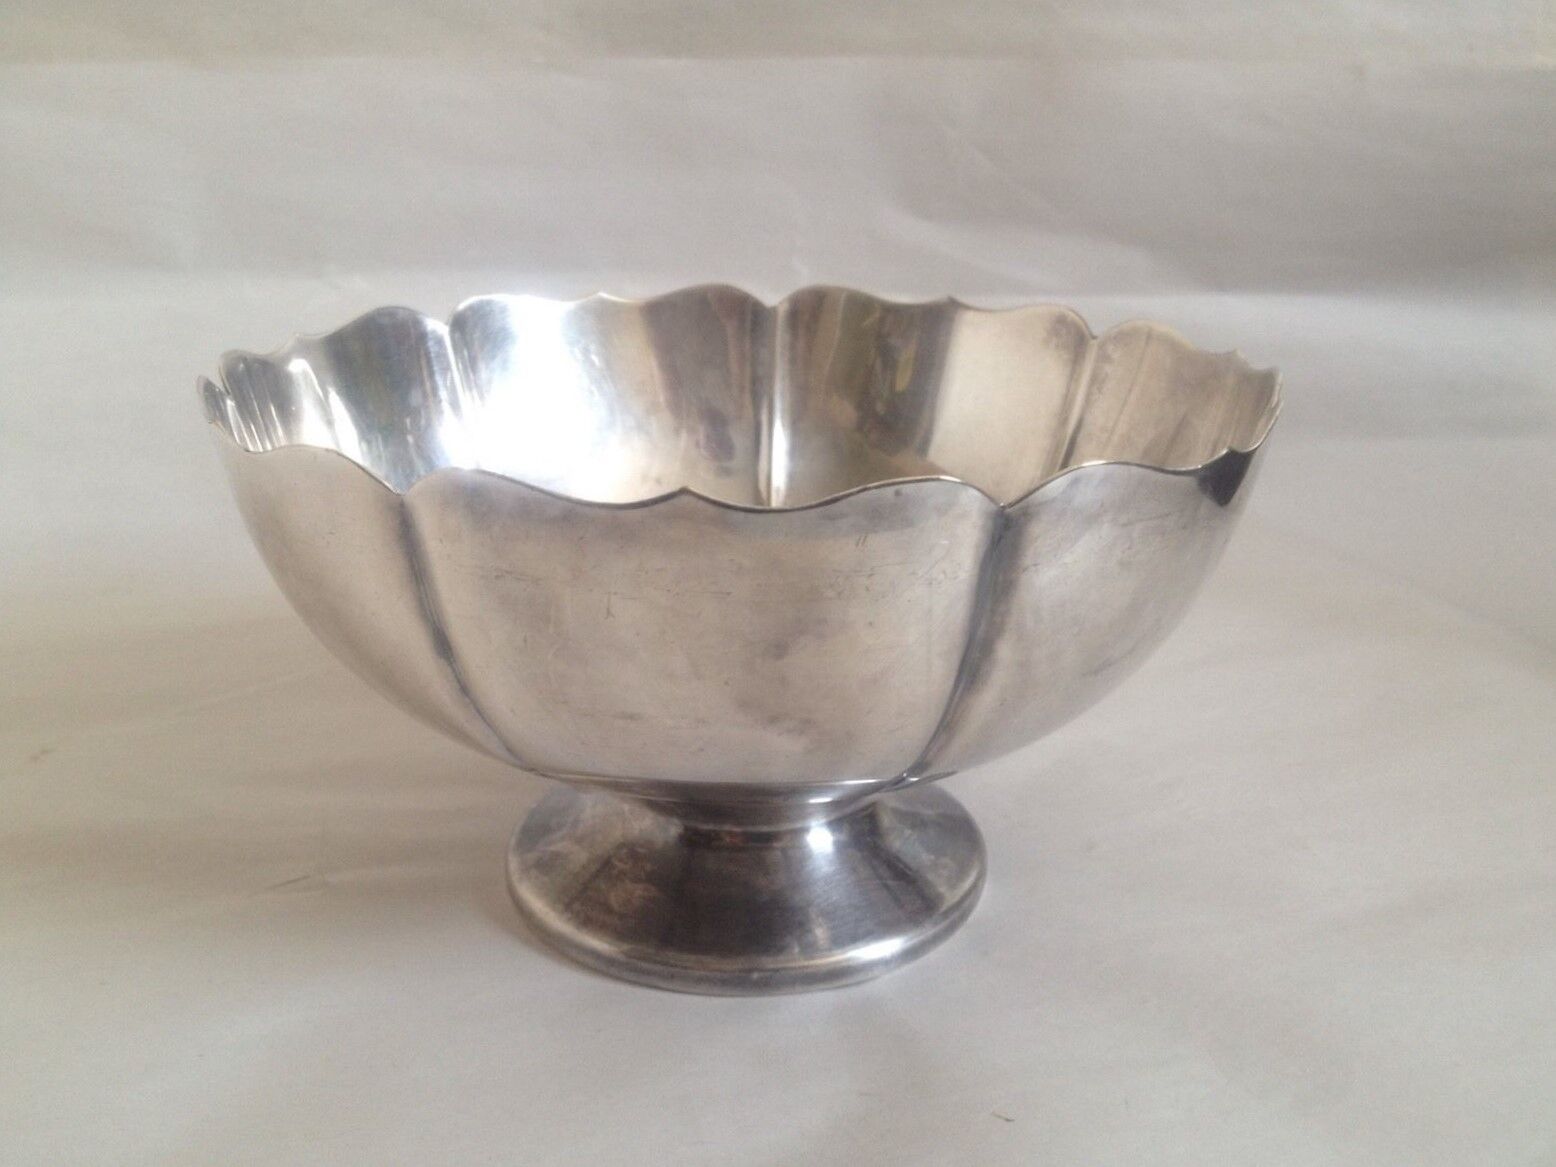 Spasm price Fisher Silver-plated Bowl Dublin K46 Popular brand in the world Scalloped 4